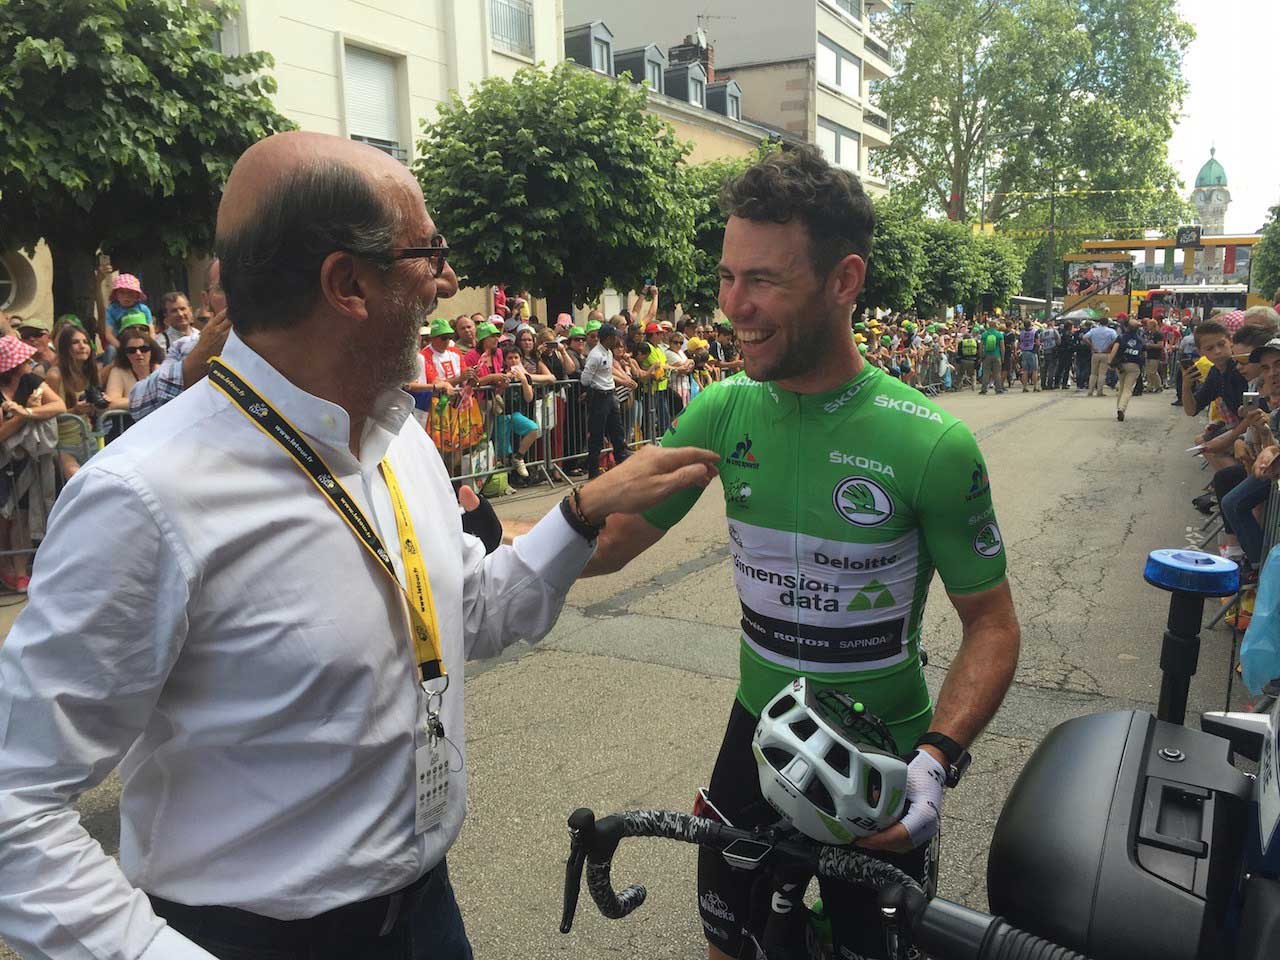 Richard Mille with words of encouragement for Mark Cavendish, just before stage 5 of the Tour de France 2016 kicked off (Image: Bill Springer)